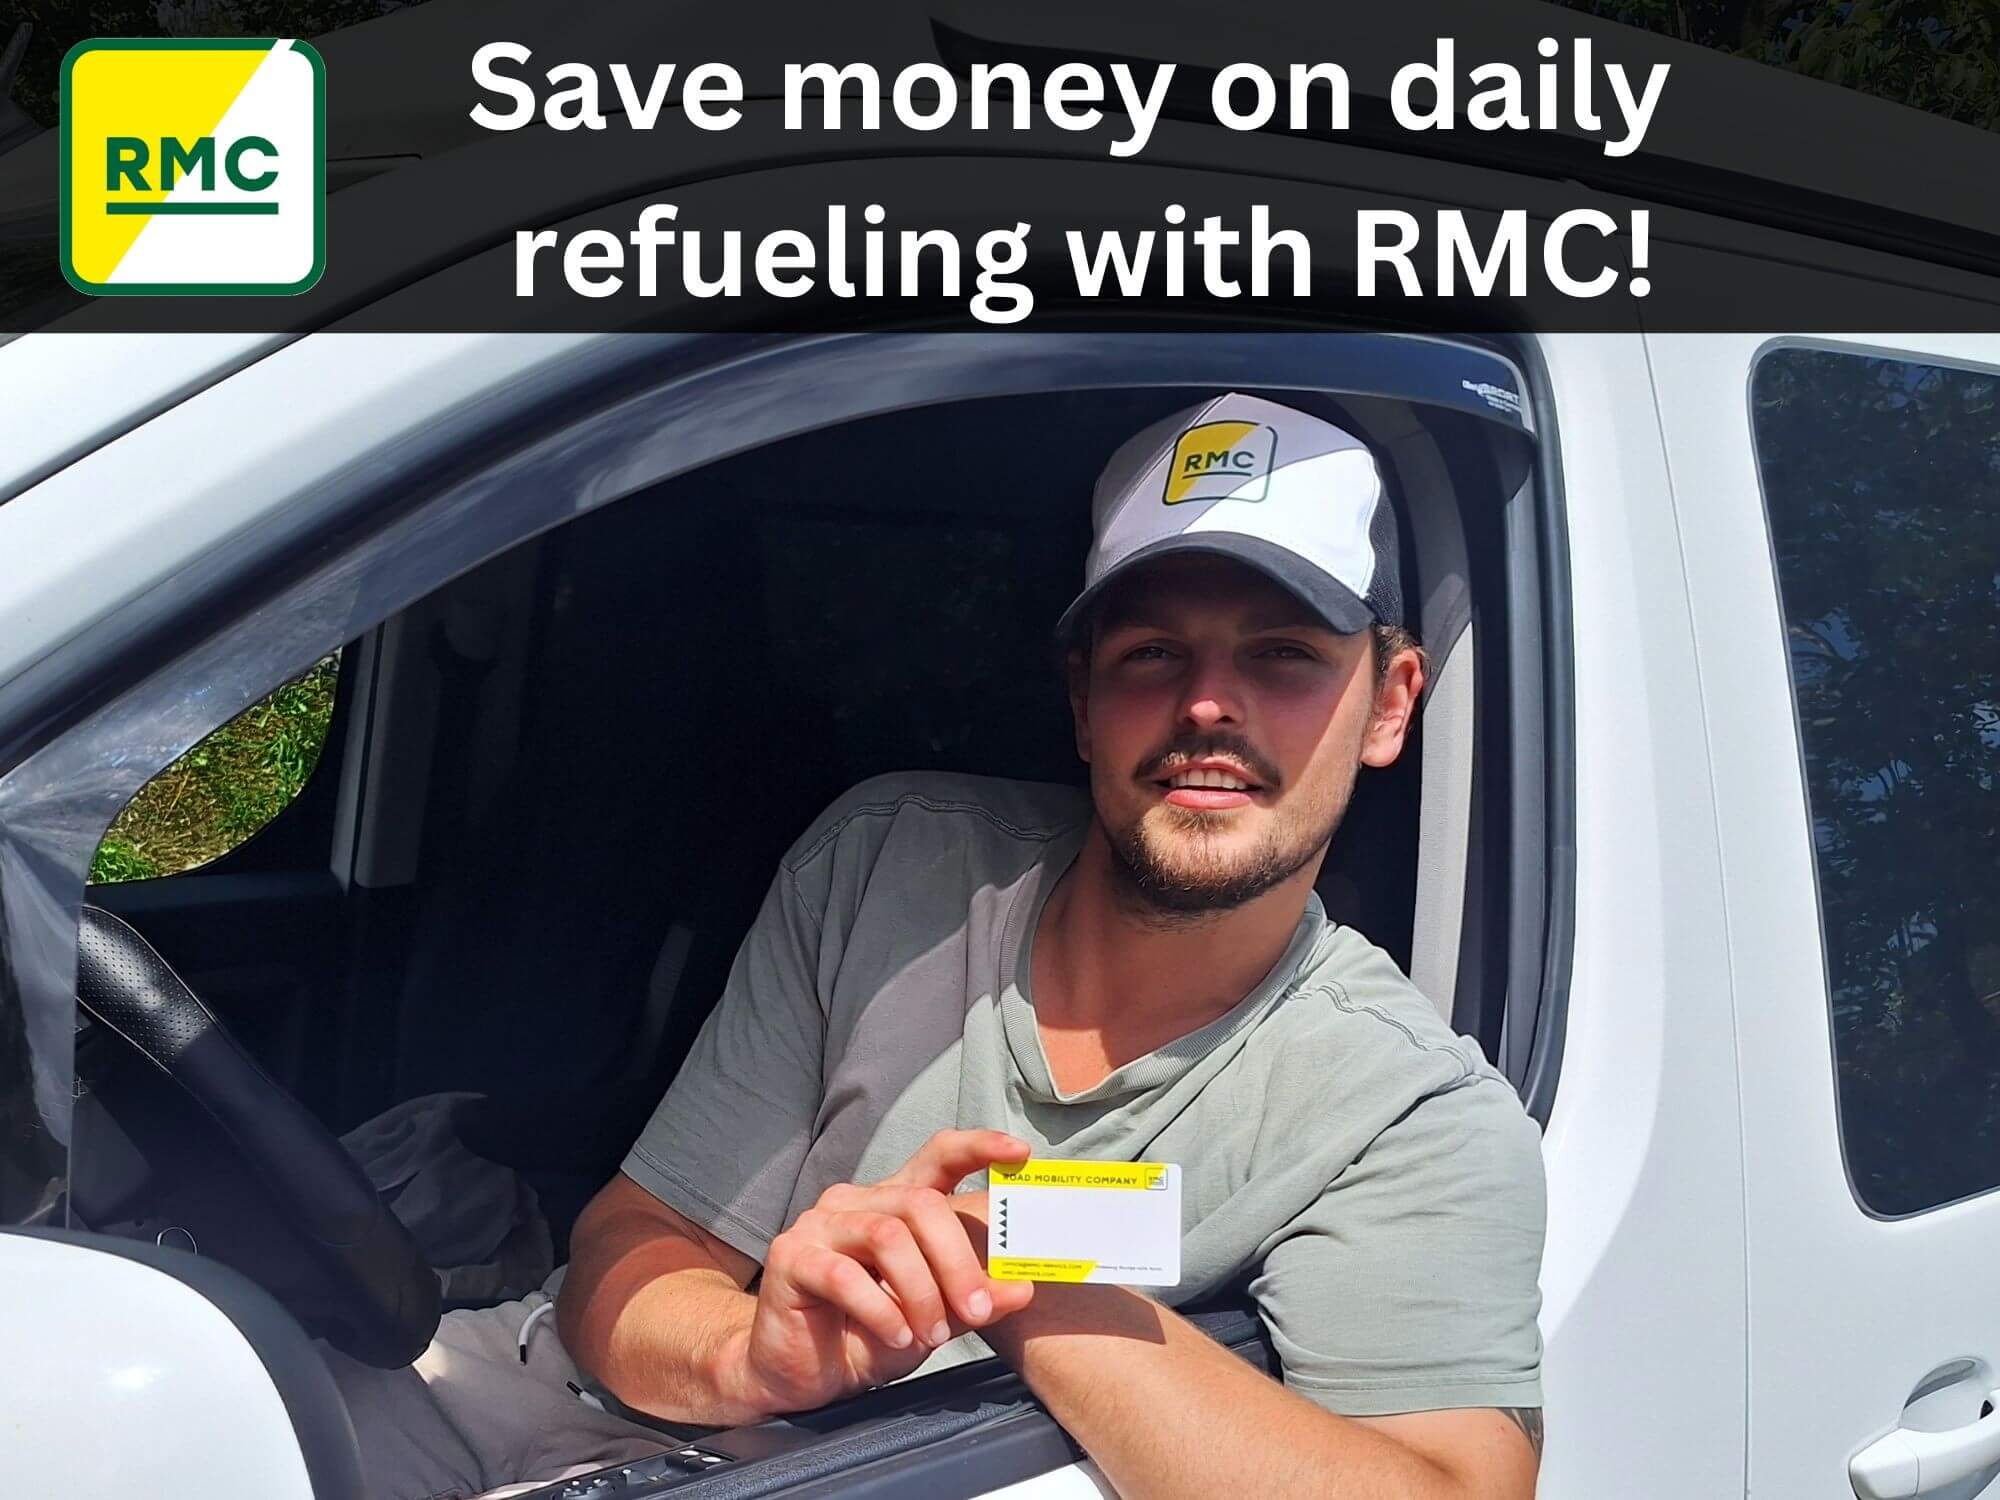 Save money on daily refueling with the RMC fuel card